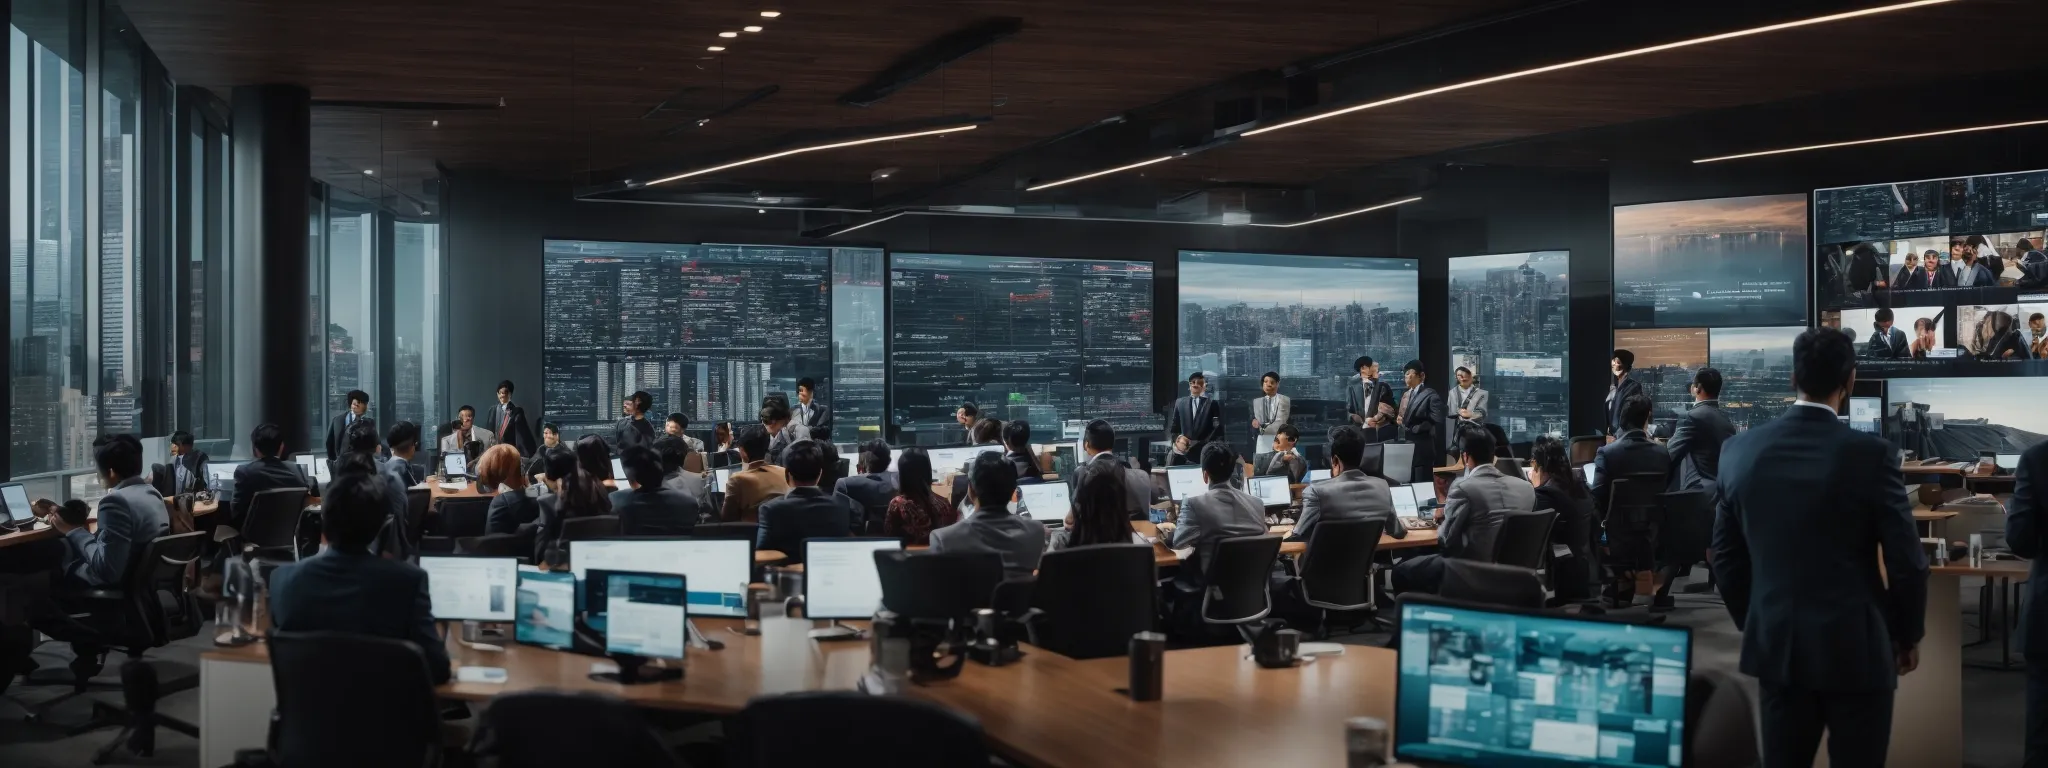 a bustling conference room with diverse professionals engaging over expansive digital displays highlighting social media trends and data analytics.